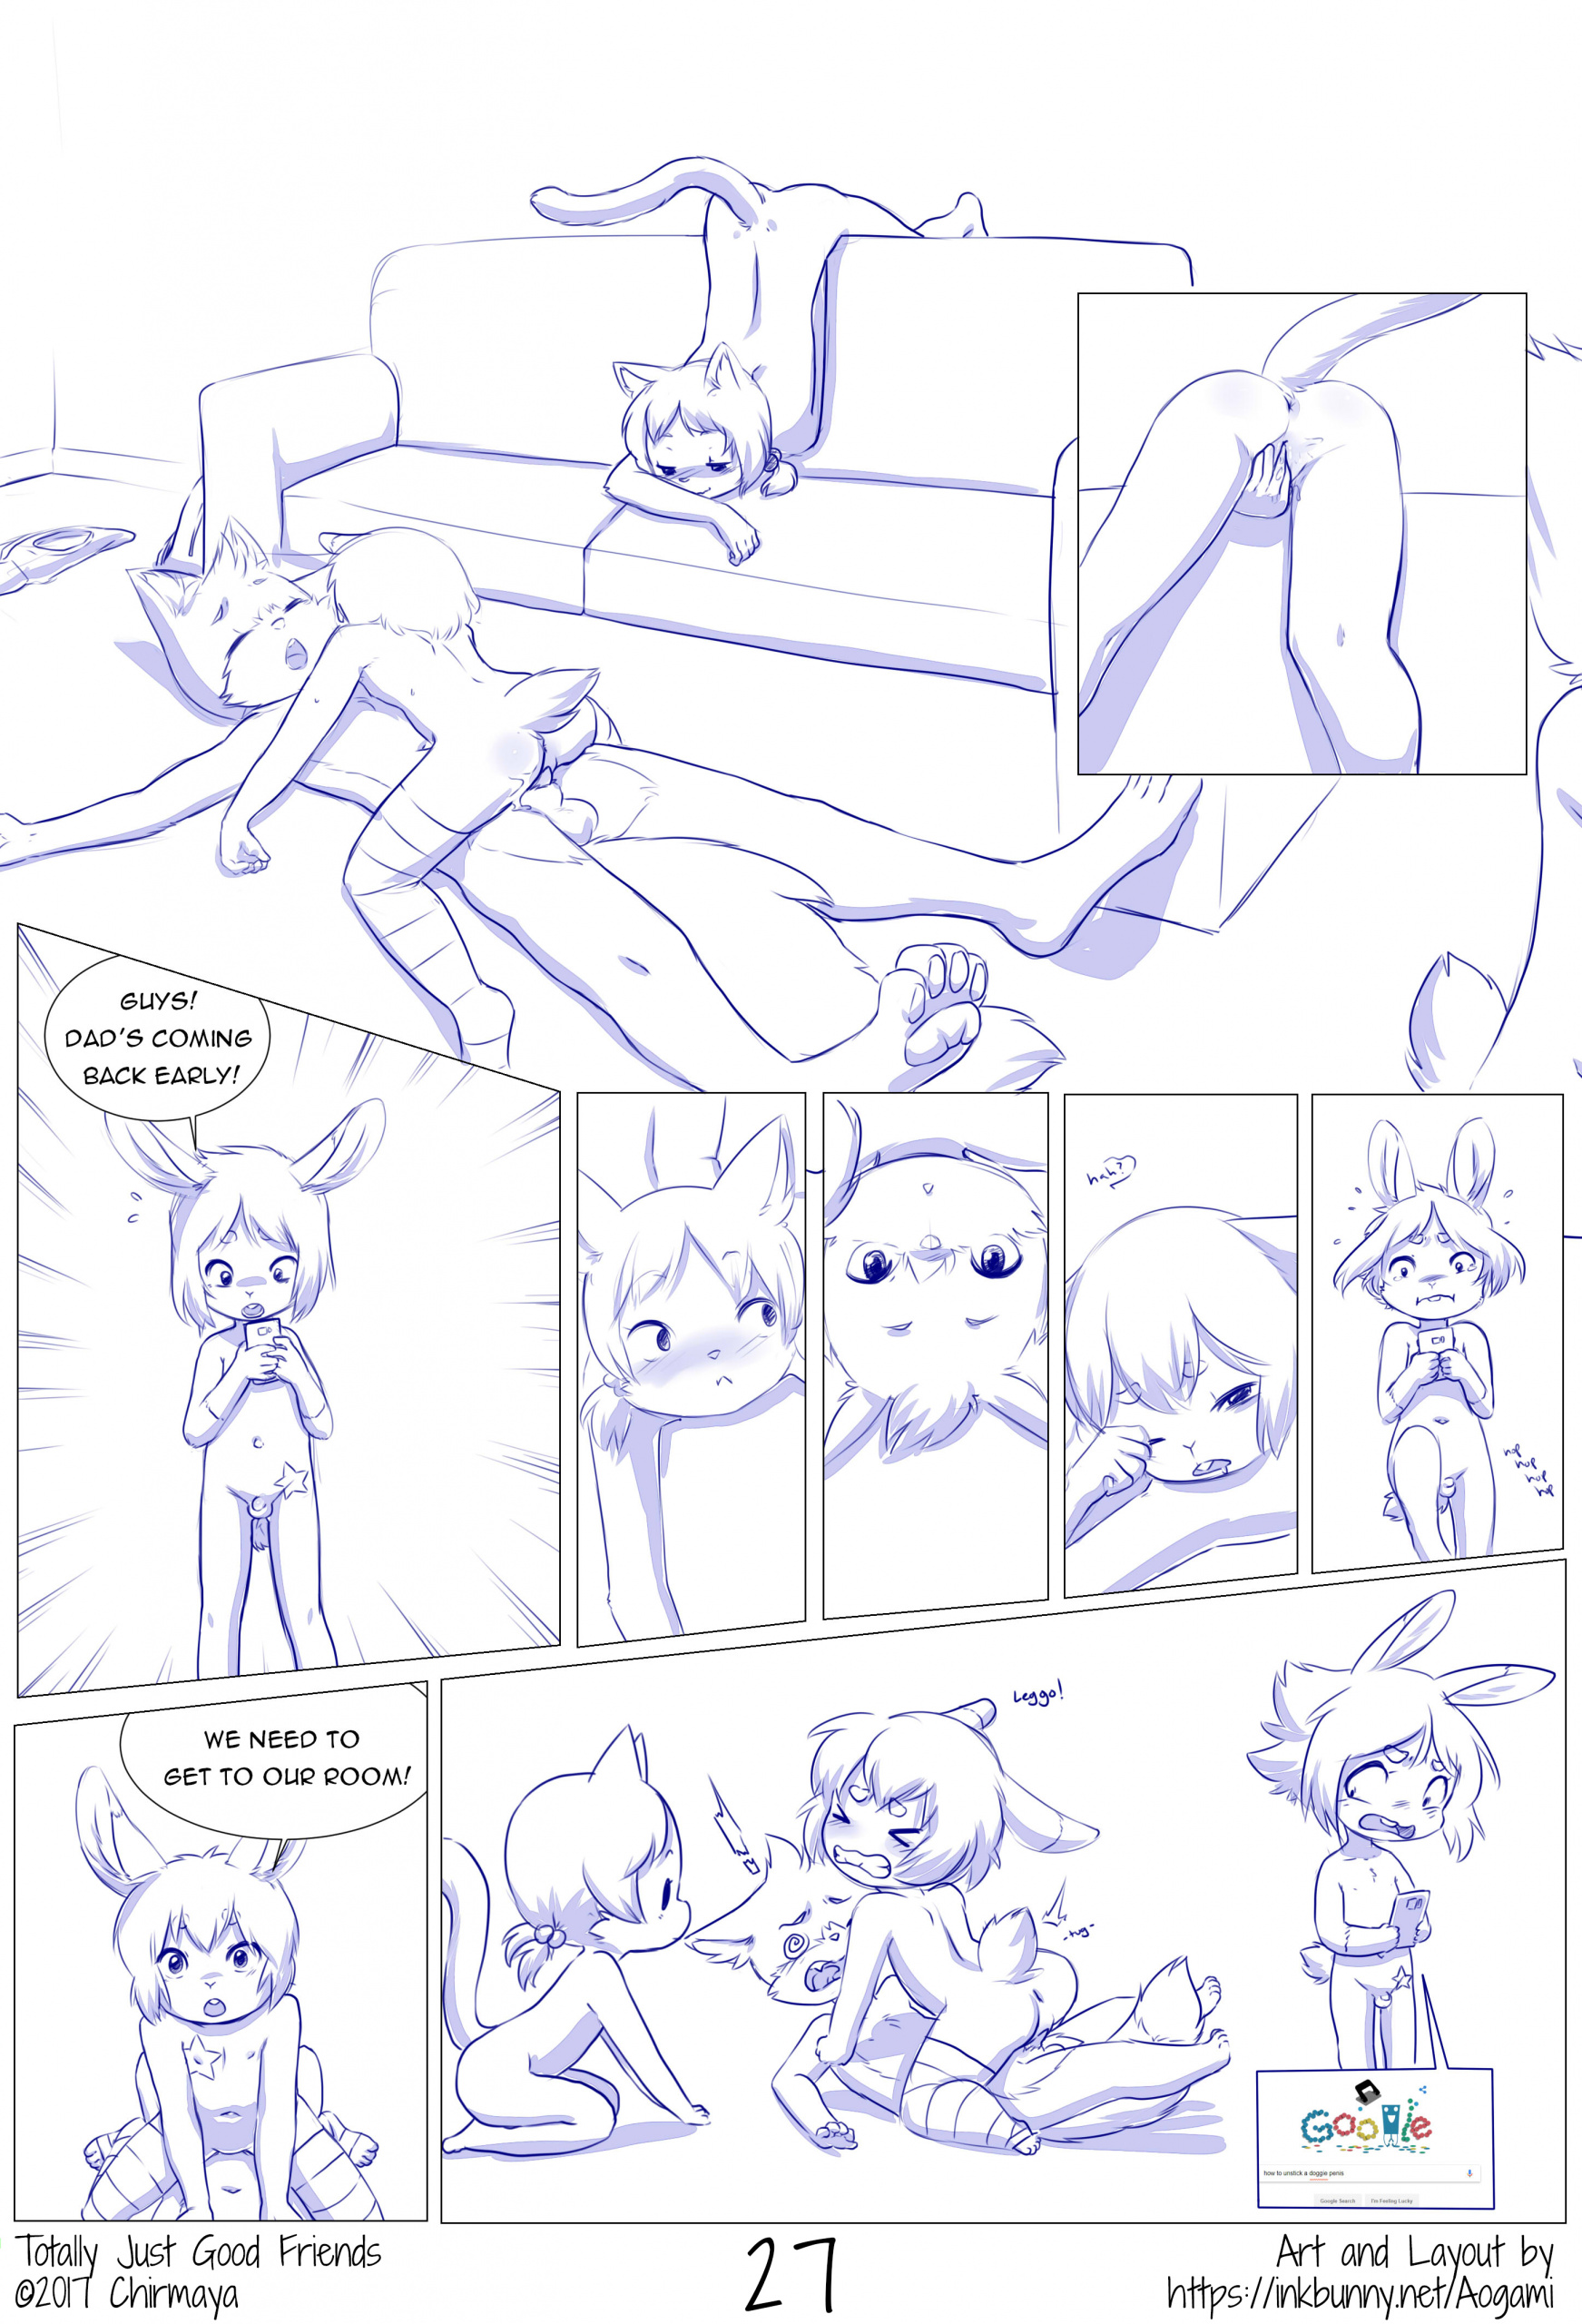 Totally Just Good Friends porn comics Oral sex, Anal Sex, Blowjob, Creampie, Cum Swallow, cunnilingus, Double Penetration, fingering, Furry, Gangbang, Group Sex, Lesbians, Lolicon, Masturbation, Sex Toys, Stockings, Straight, Straight Shota, Threesome, Virgin, X-Ray